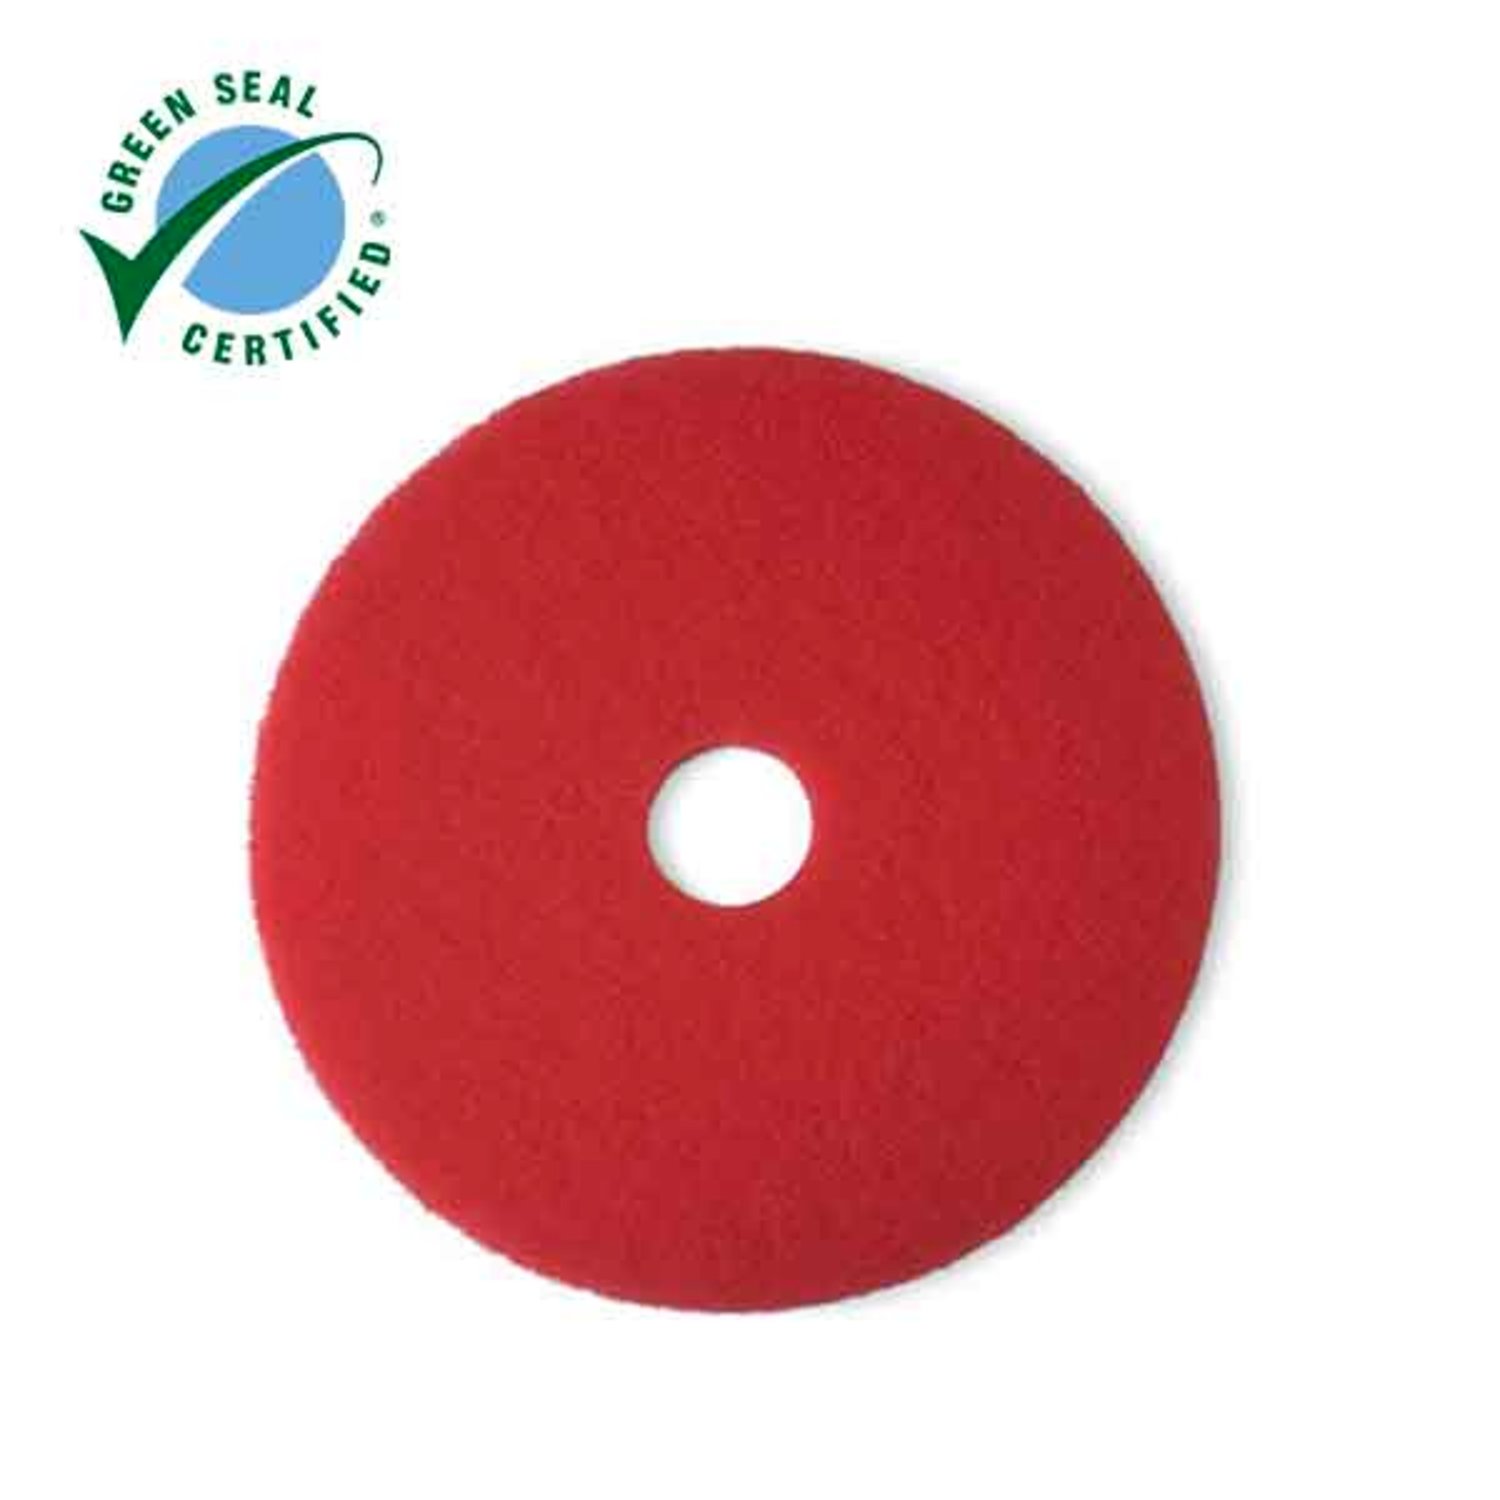 7000120641 - 3M Red Buffer Pad 5100, Red, 560 mm x 82 mm, 22 in, 5 ea/Case